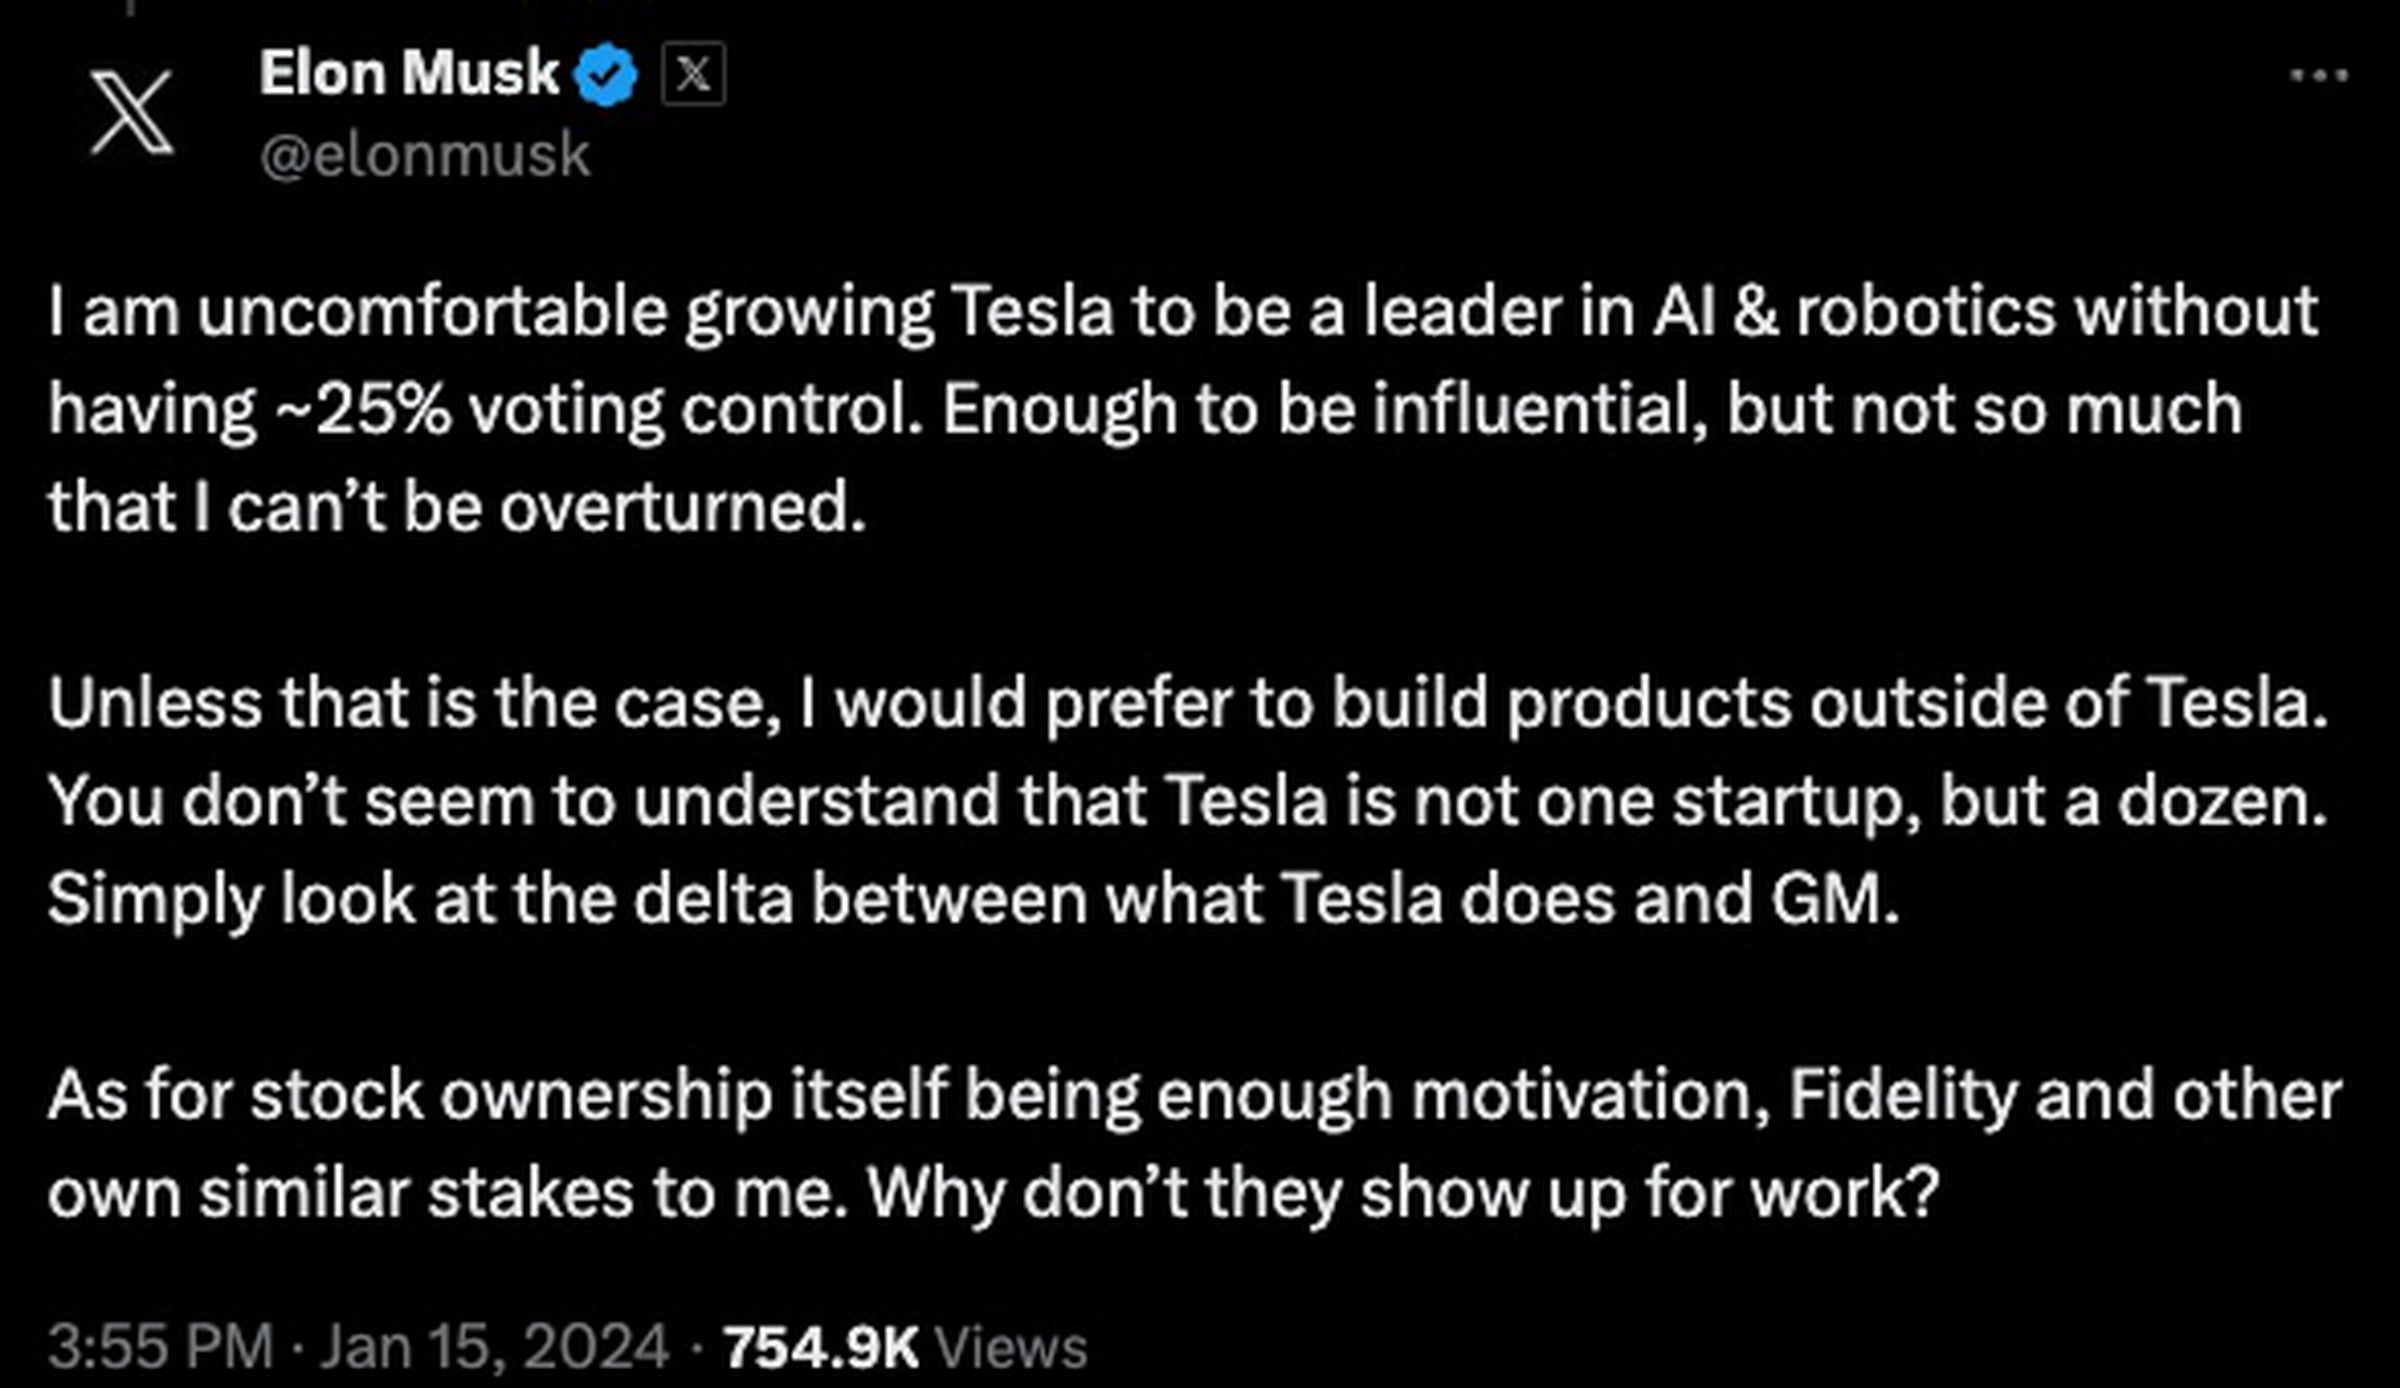 “I am uncomfortable growing Tesla to be a leader in AI &amp; robotics without ~25% control. Enough to be influential, but not so much I can’t be overturned. Unless that is the case, I would prefer to build products outside of Tesla. You don’t seem to understand Tesla is not one startup, but a dozen. Simply look at the delta between what Tesla does and GM.&nbsp; As for stock ownership itself being enough motivation, Fidelity and other own similar stakes. Why don’t they show up for work?”